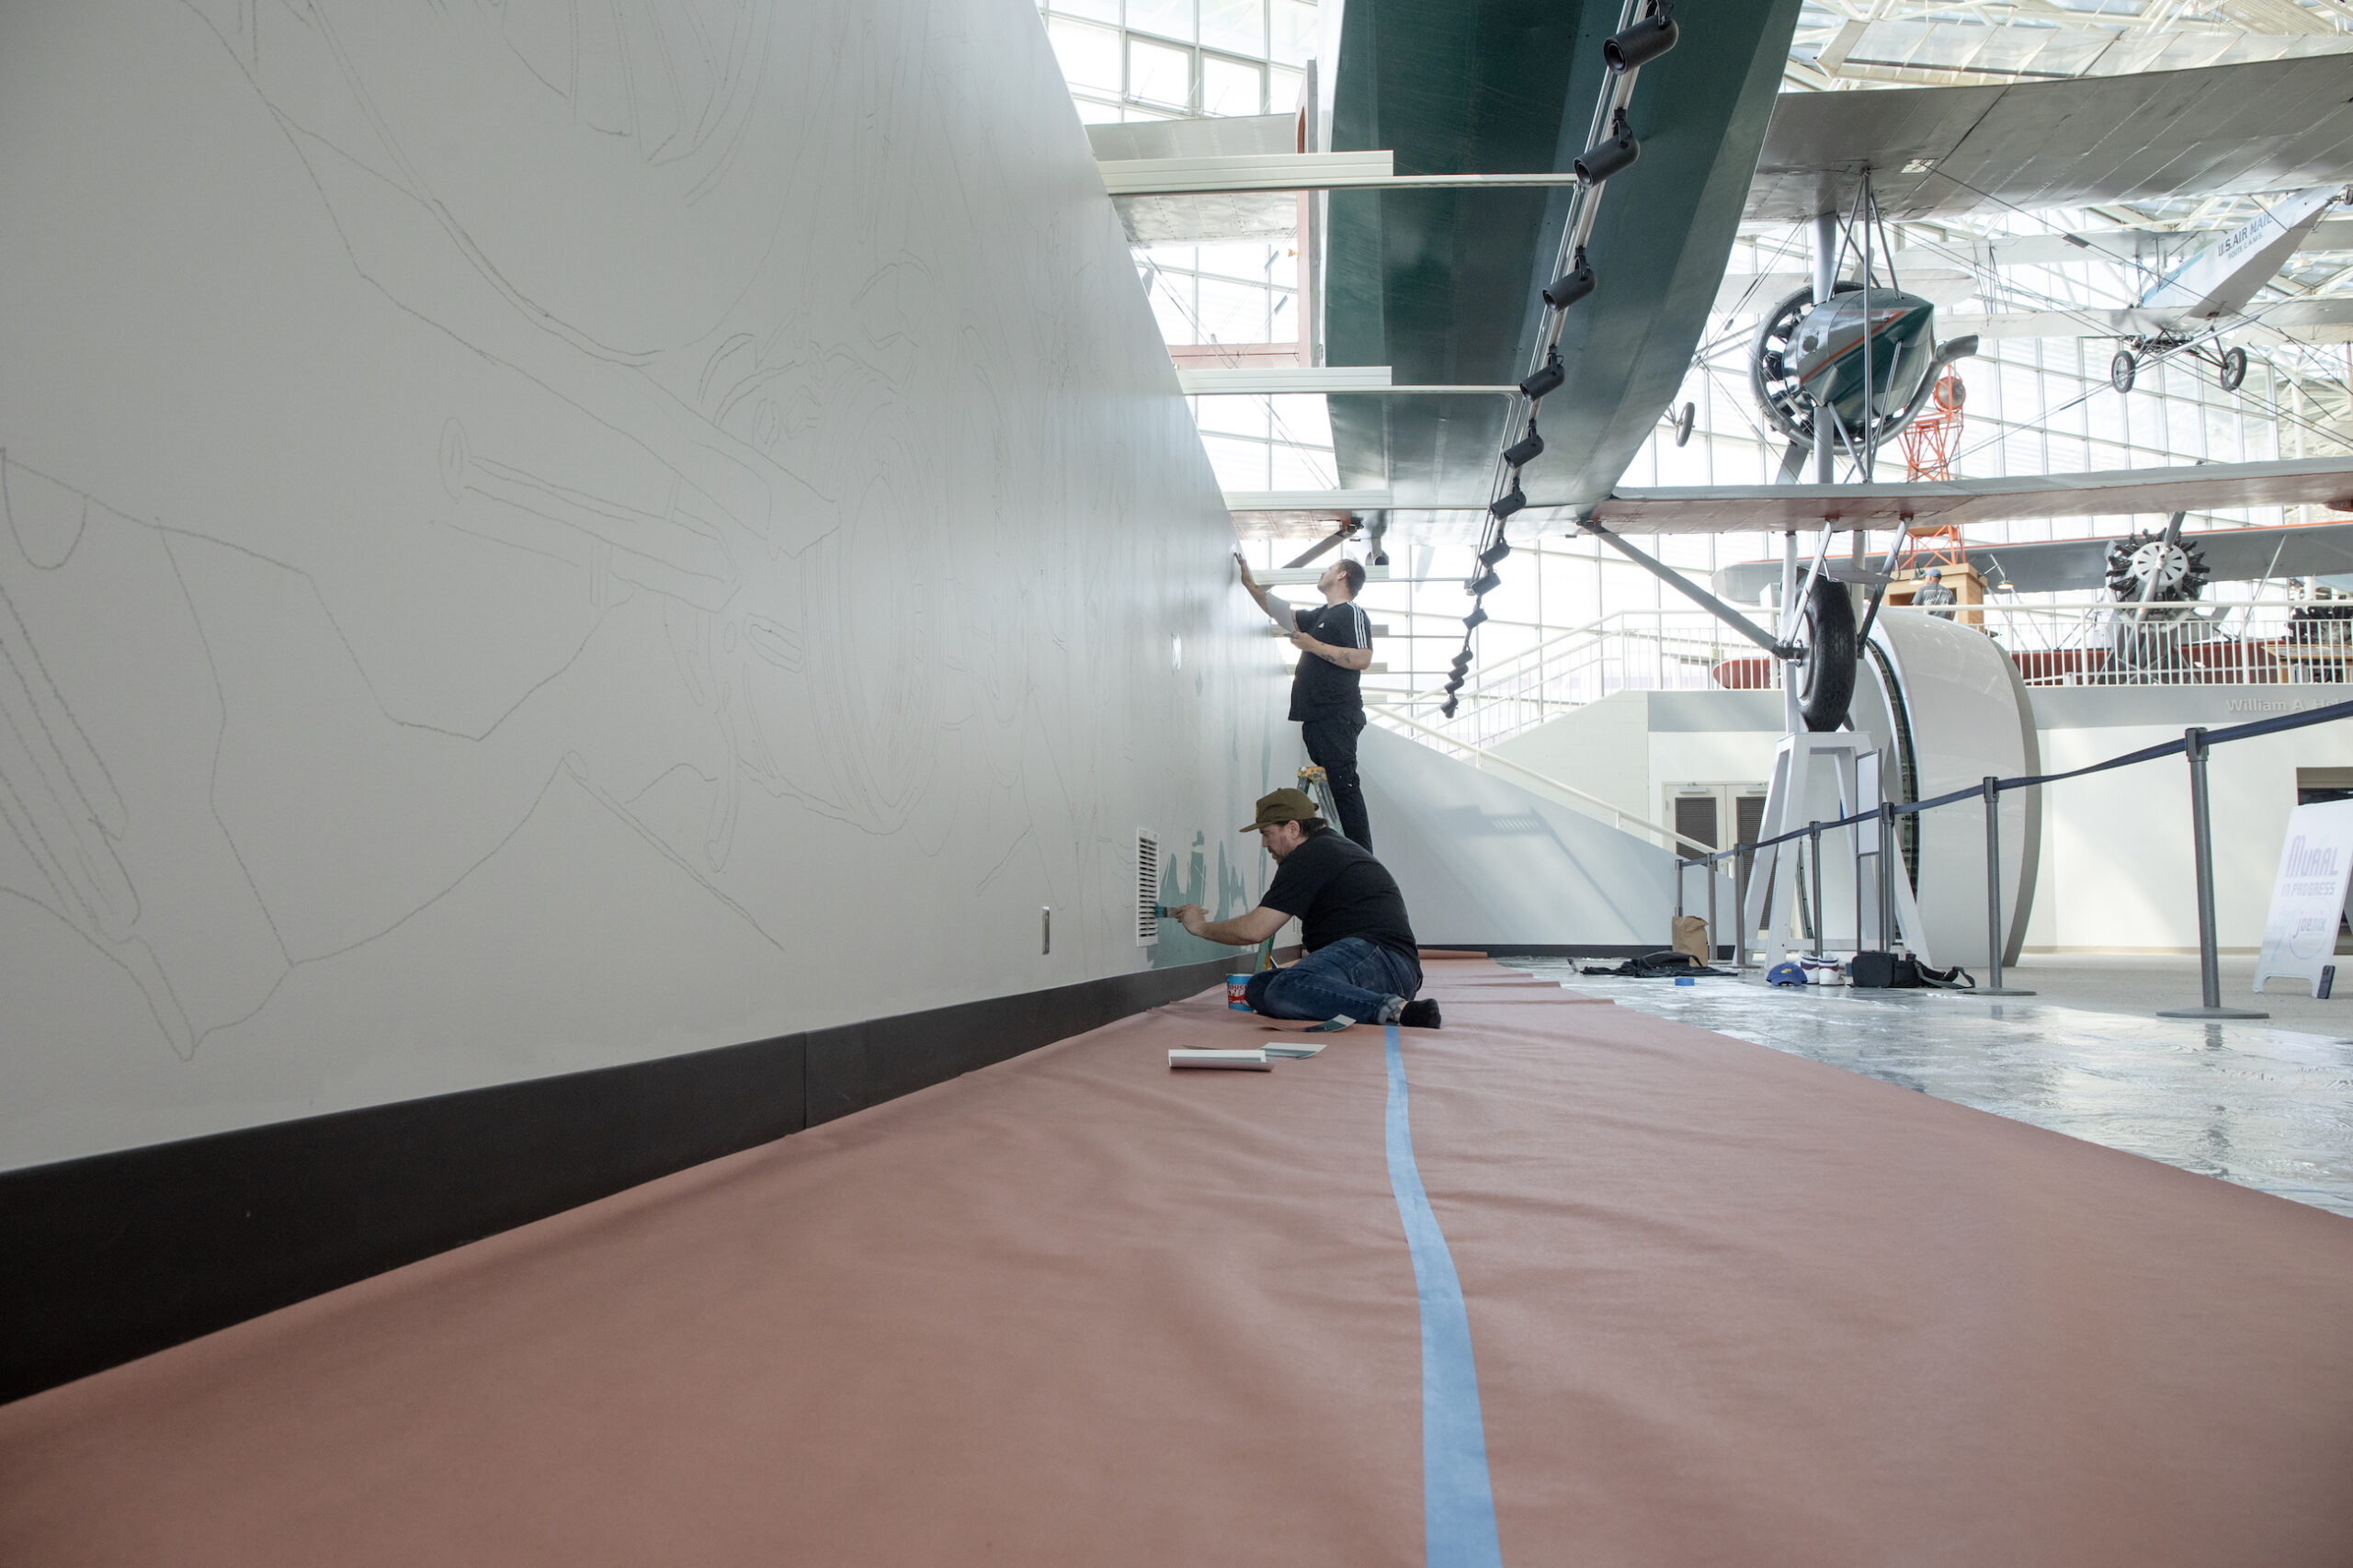 Artist Joe Nix sitting on the ground painting a mural in the Great Gallery with an assistant.